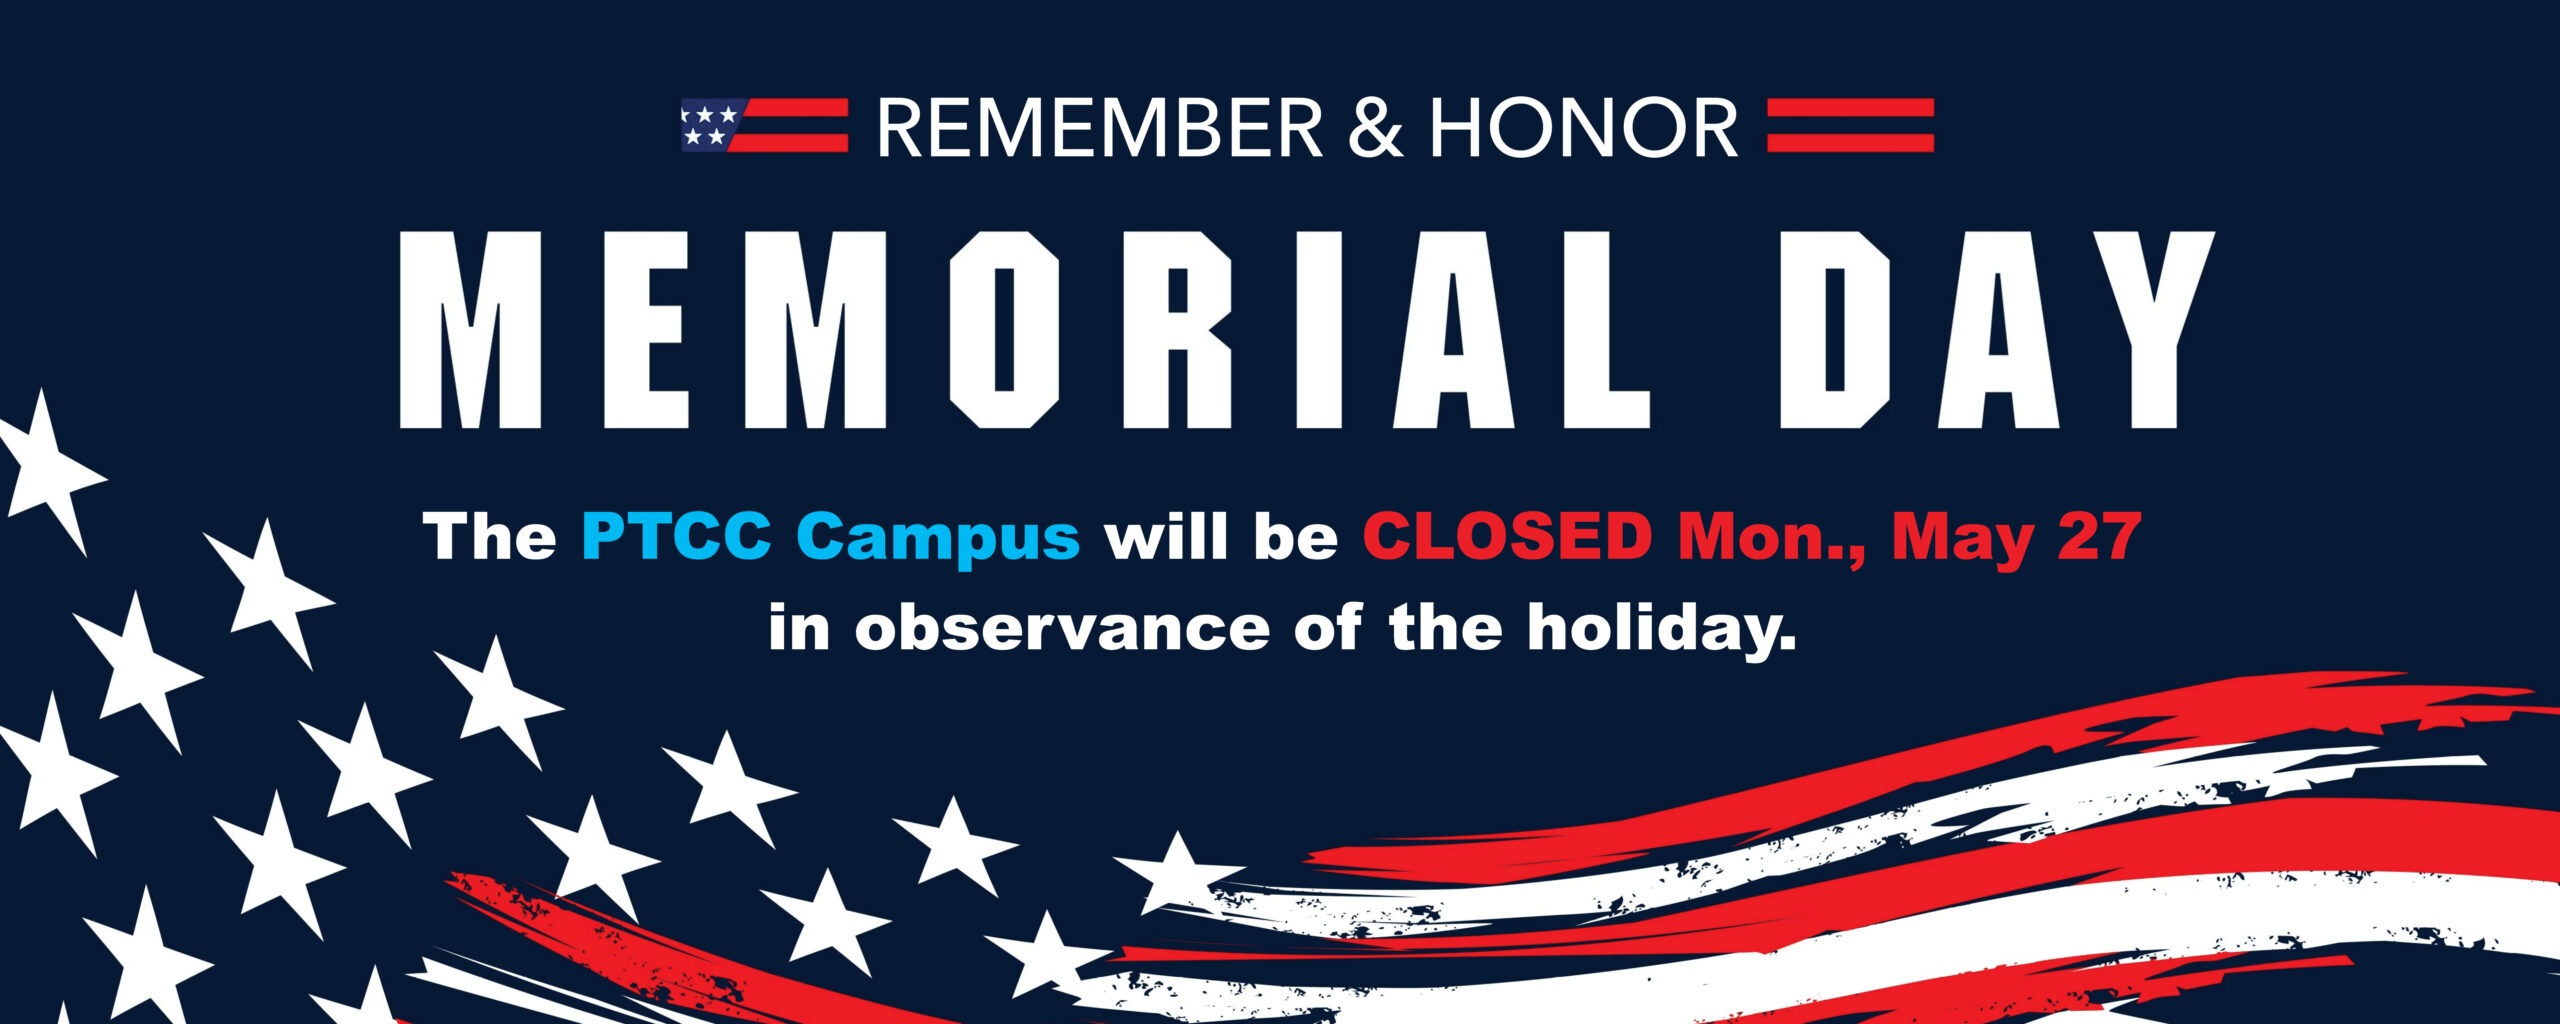 The PTCC Campus will be closed Mon., May 27 in observance of Memorial Day.